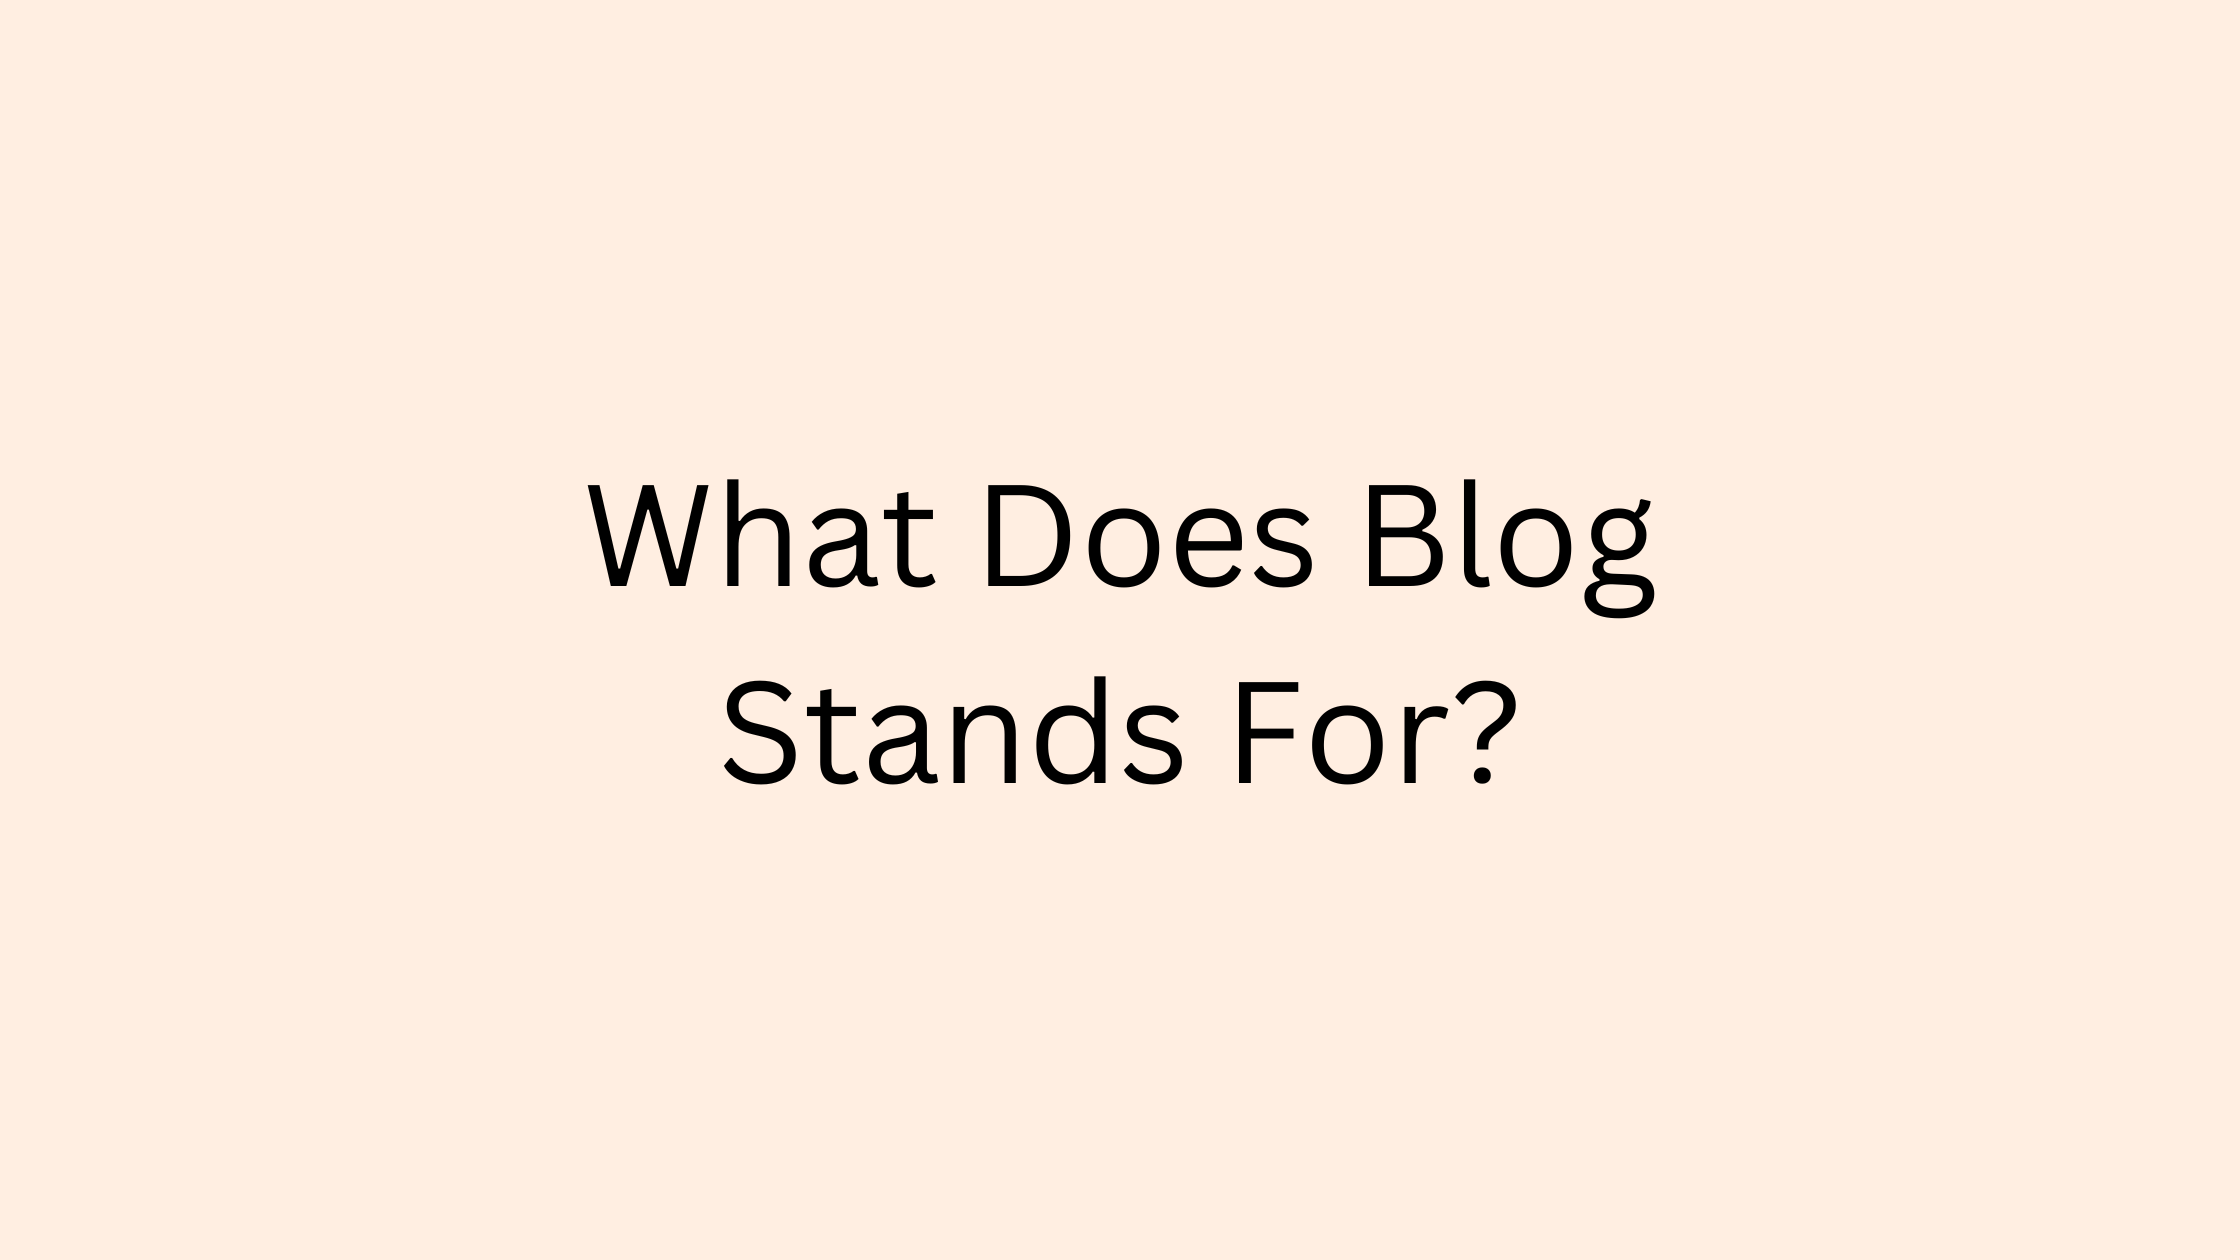 What Does Blog Stand For